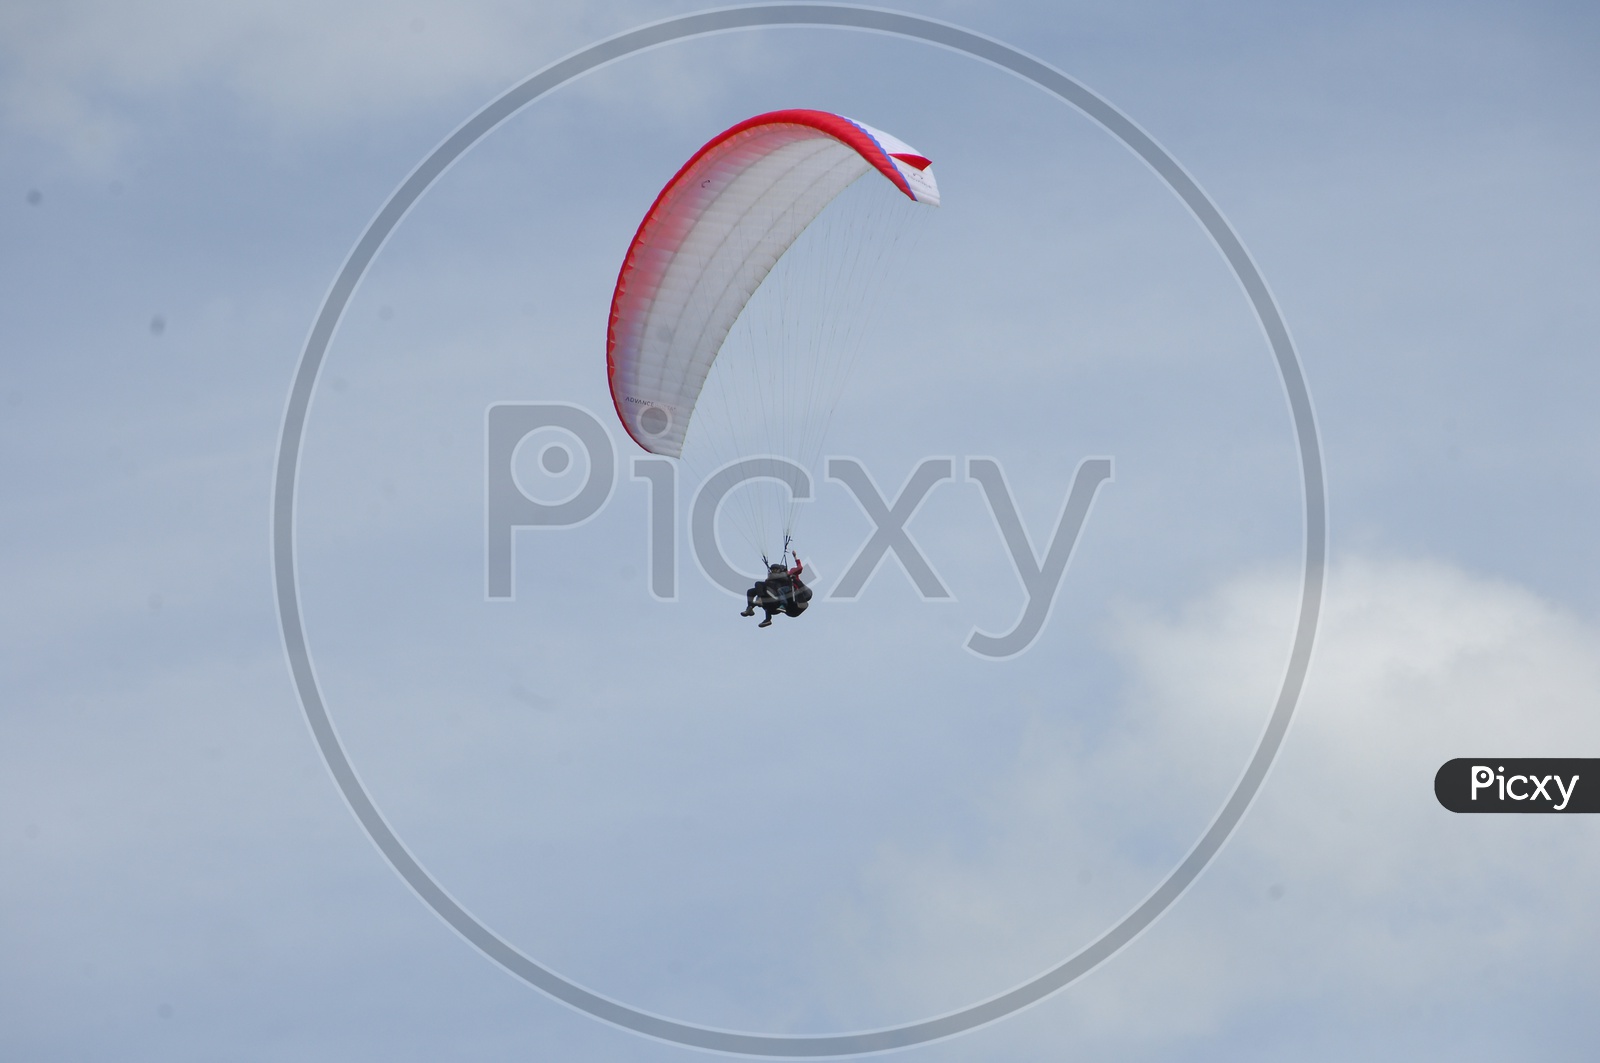 Paragliding With Parachute